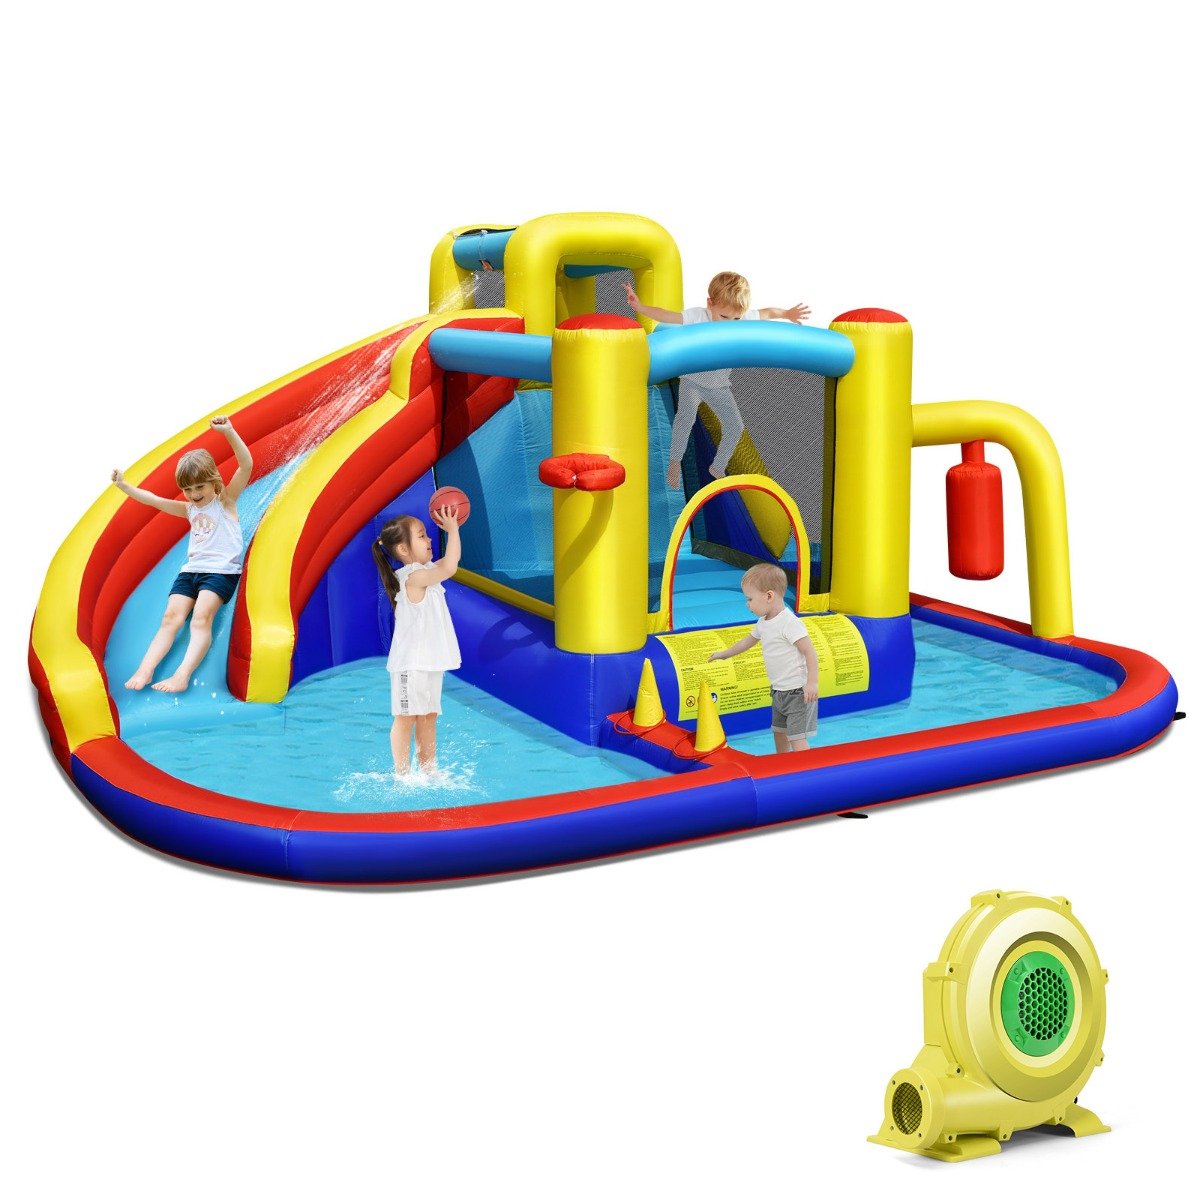 Kids bouncing and sliding on our 7-in-1 Inflatable Bounce Castle